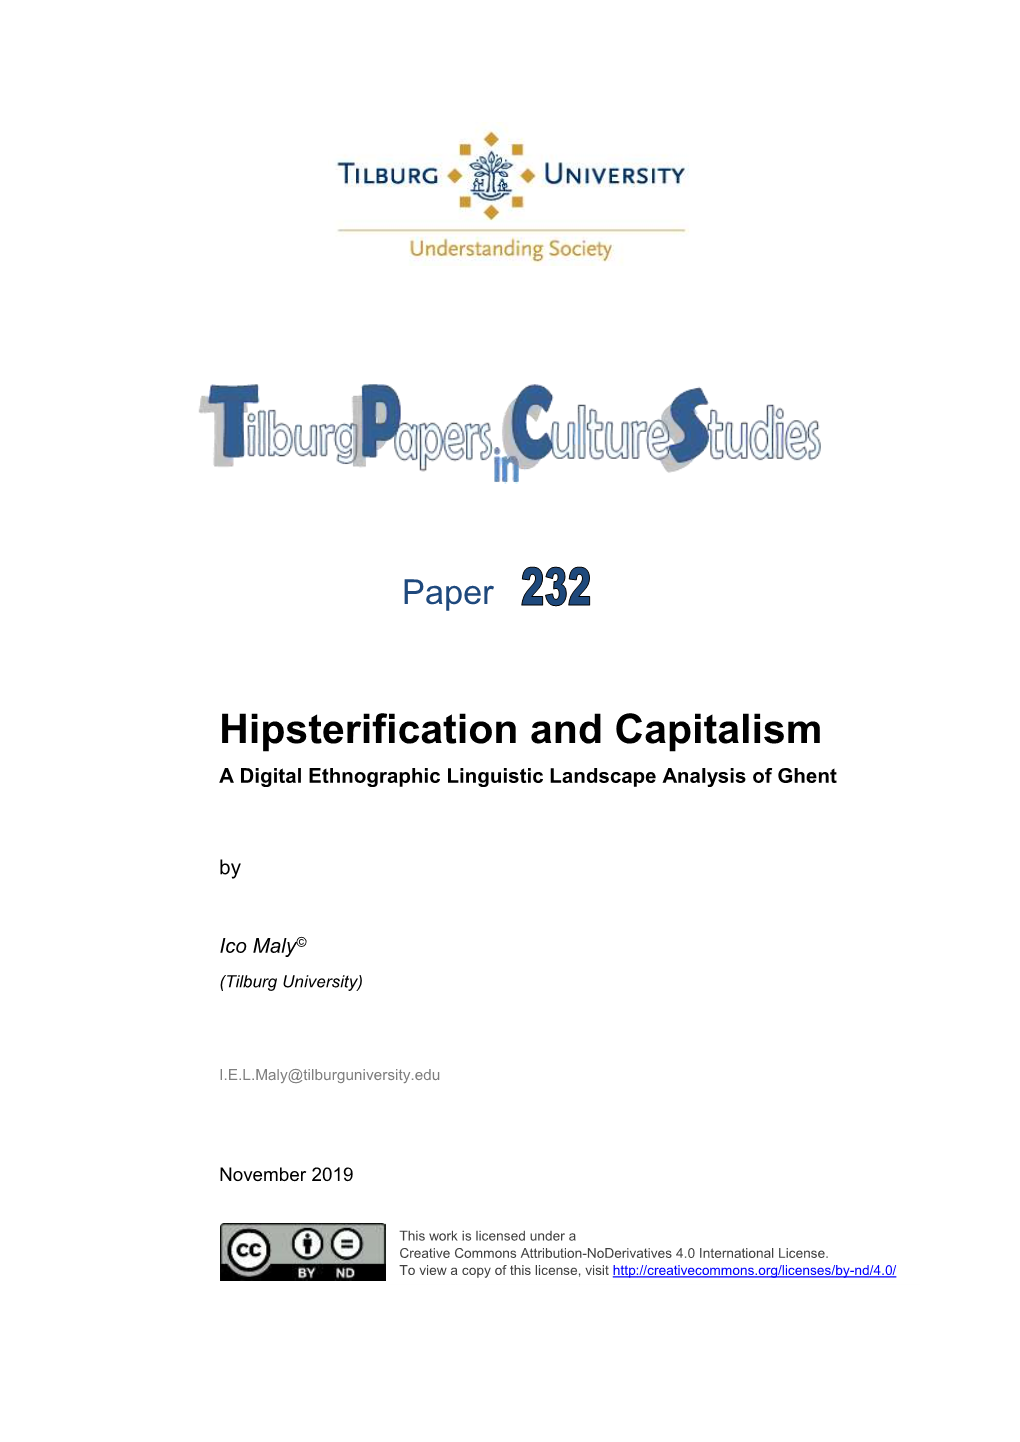 Hipsterification and Capitalism a Digital Ethnographic Linguistic Landscape Analysis of Ghent